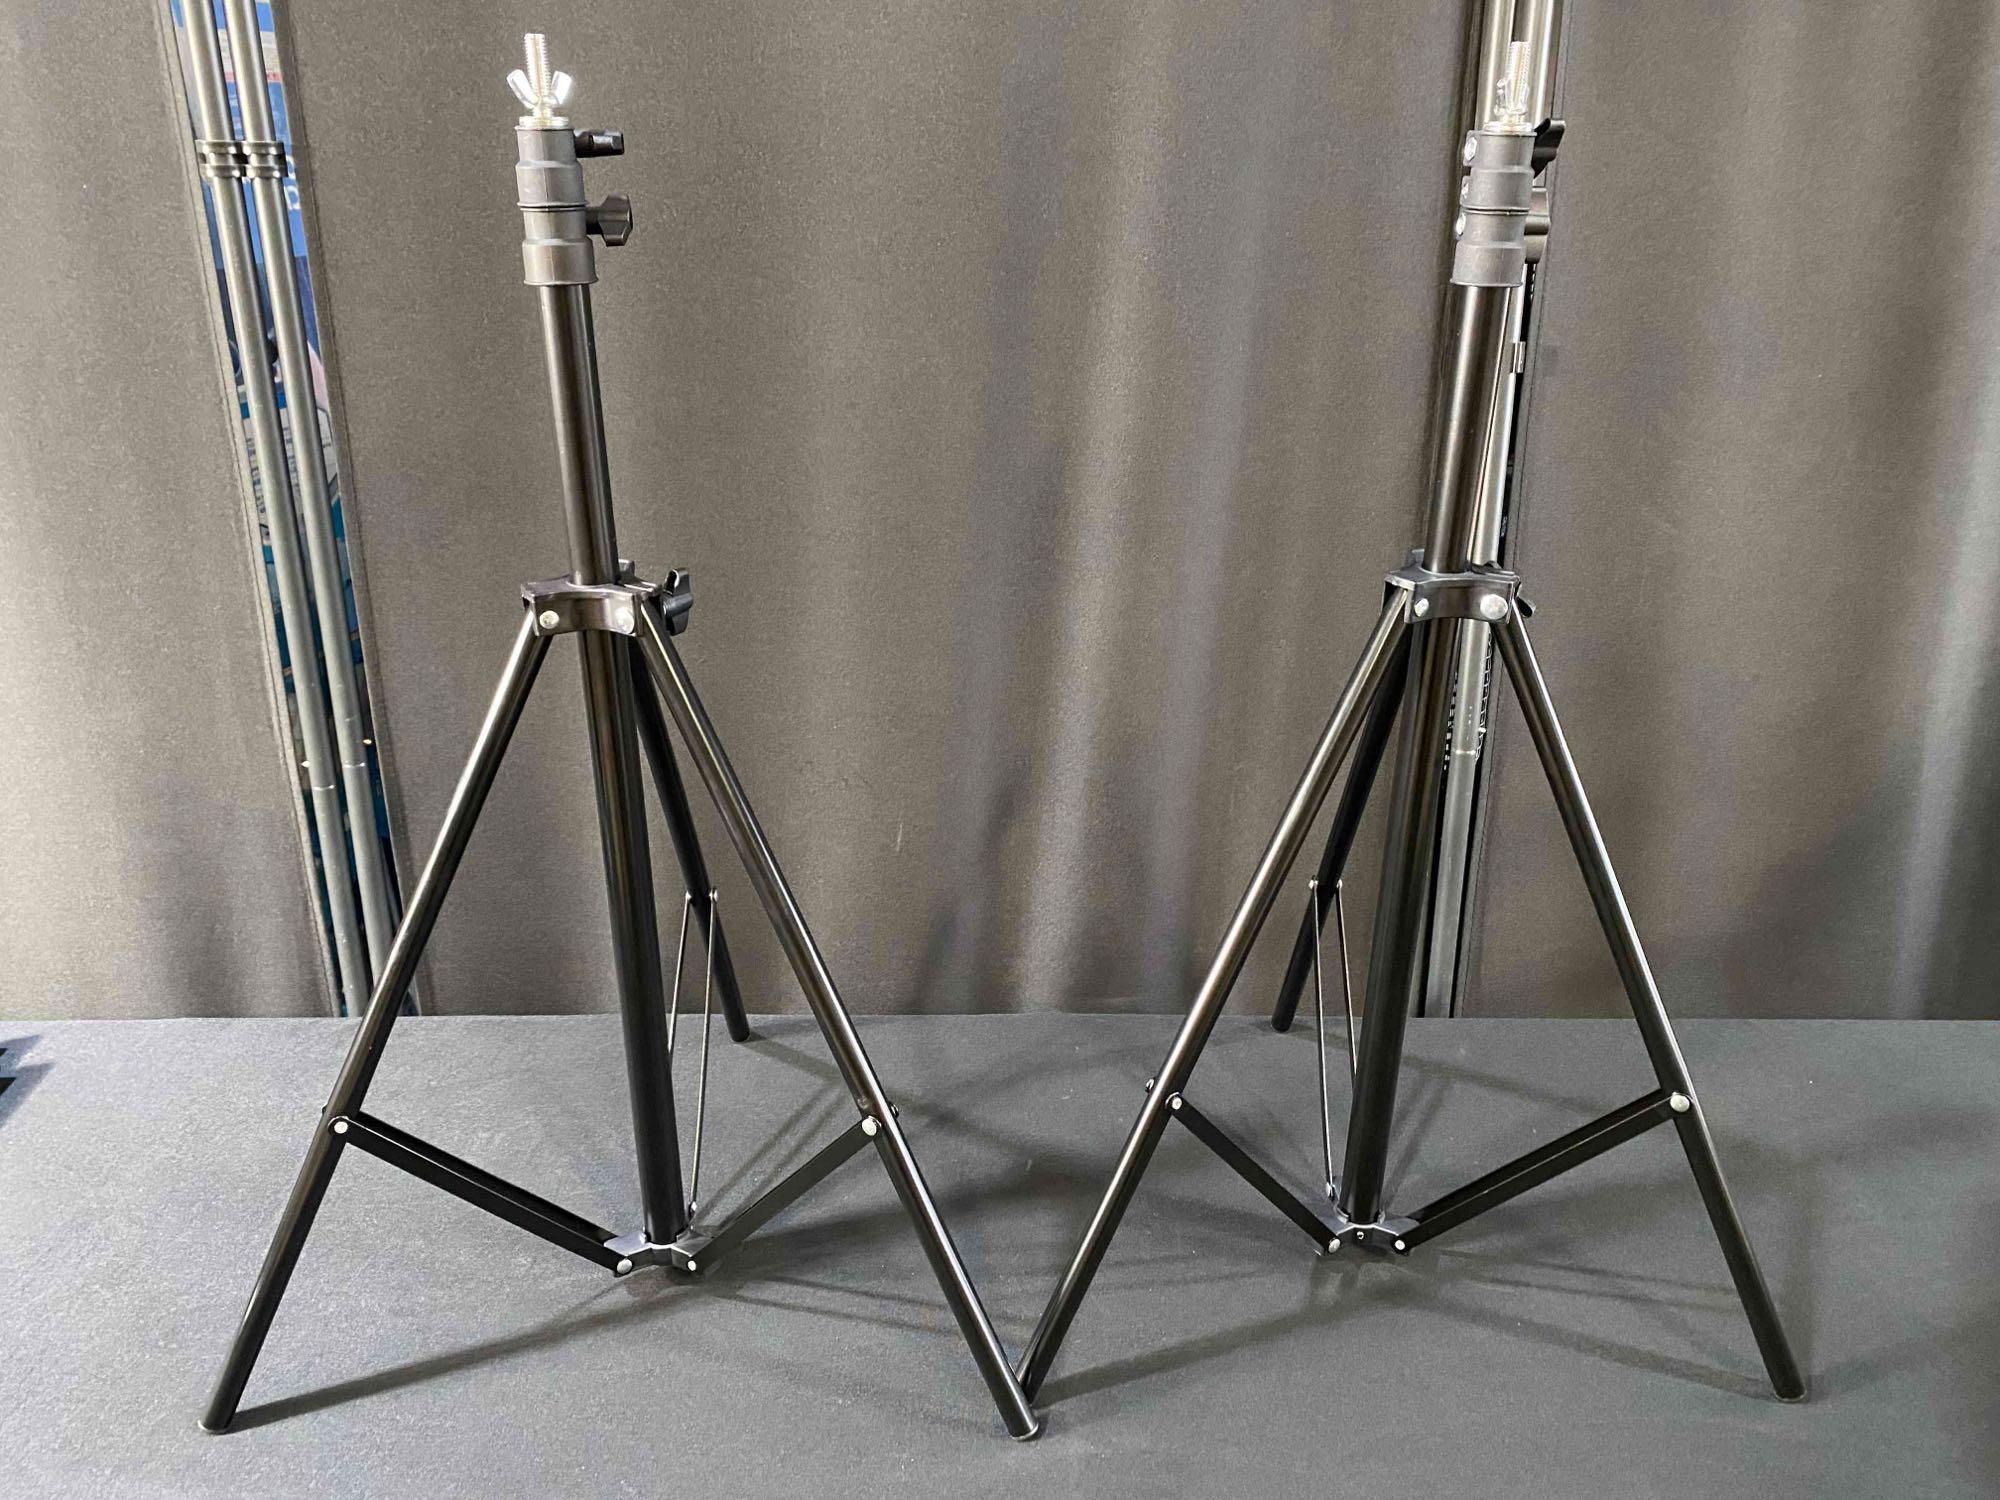 LidLife 6.5 x 10ft Backdrop Stand